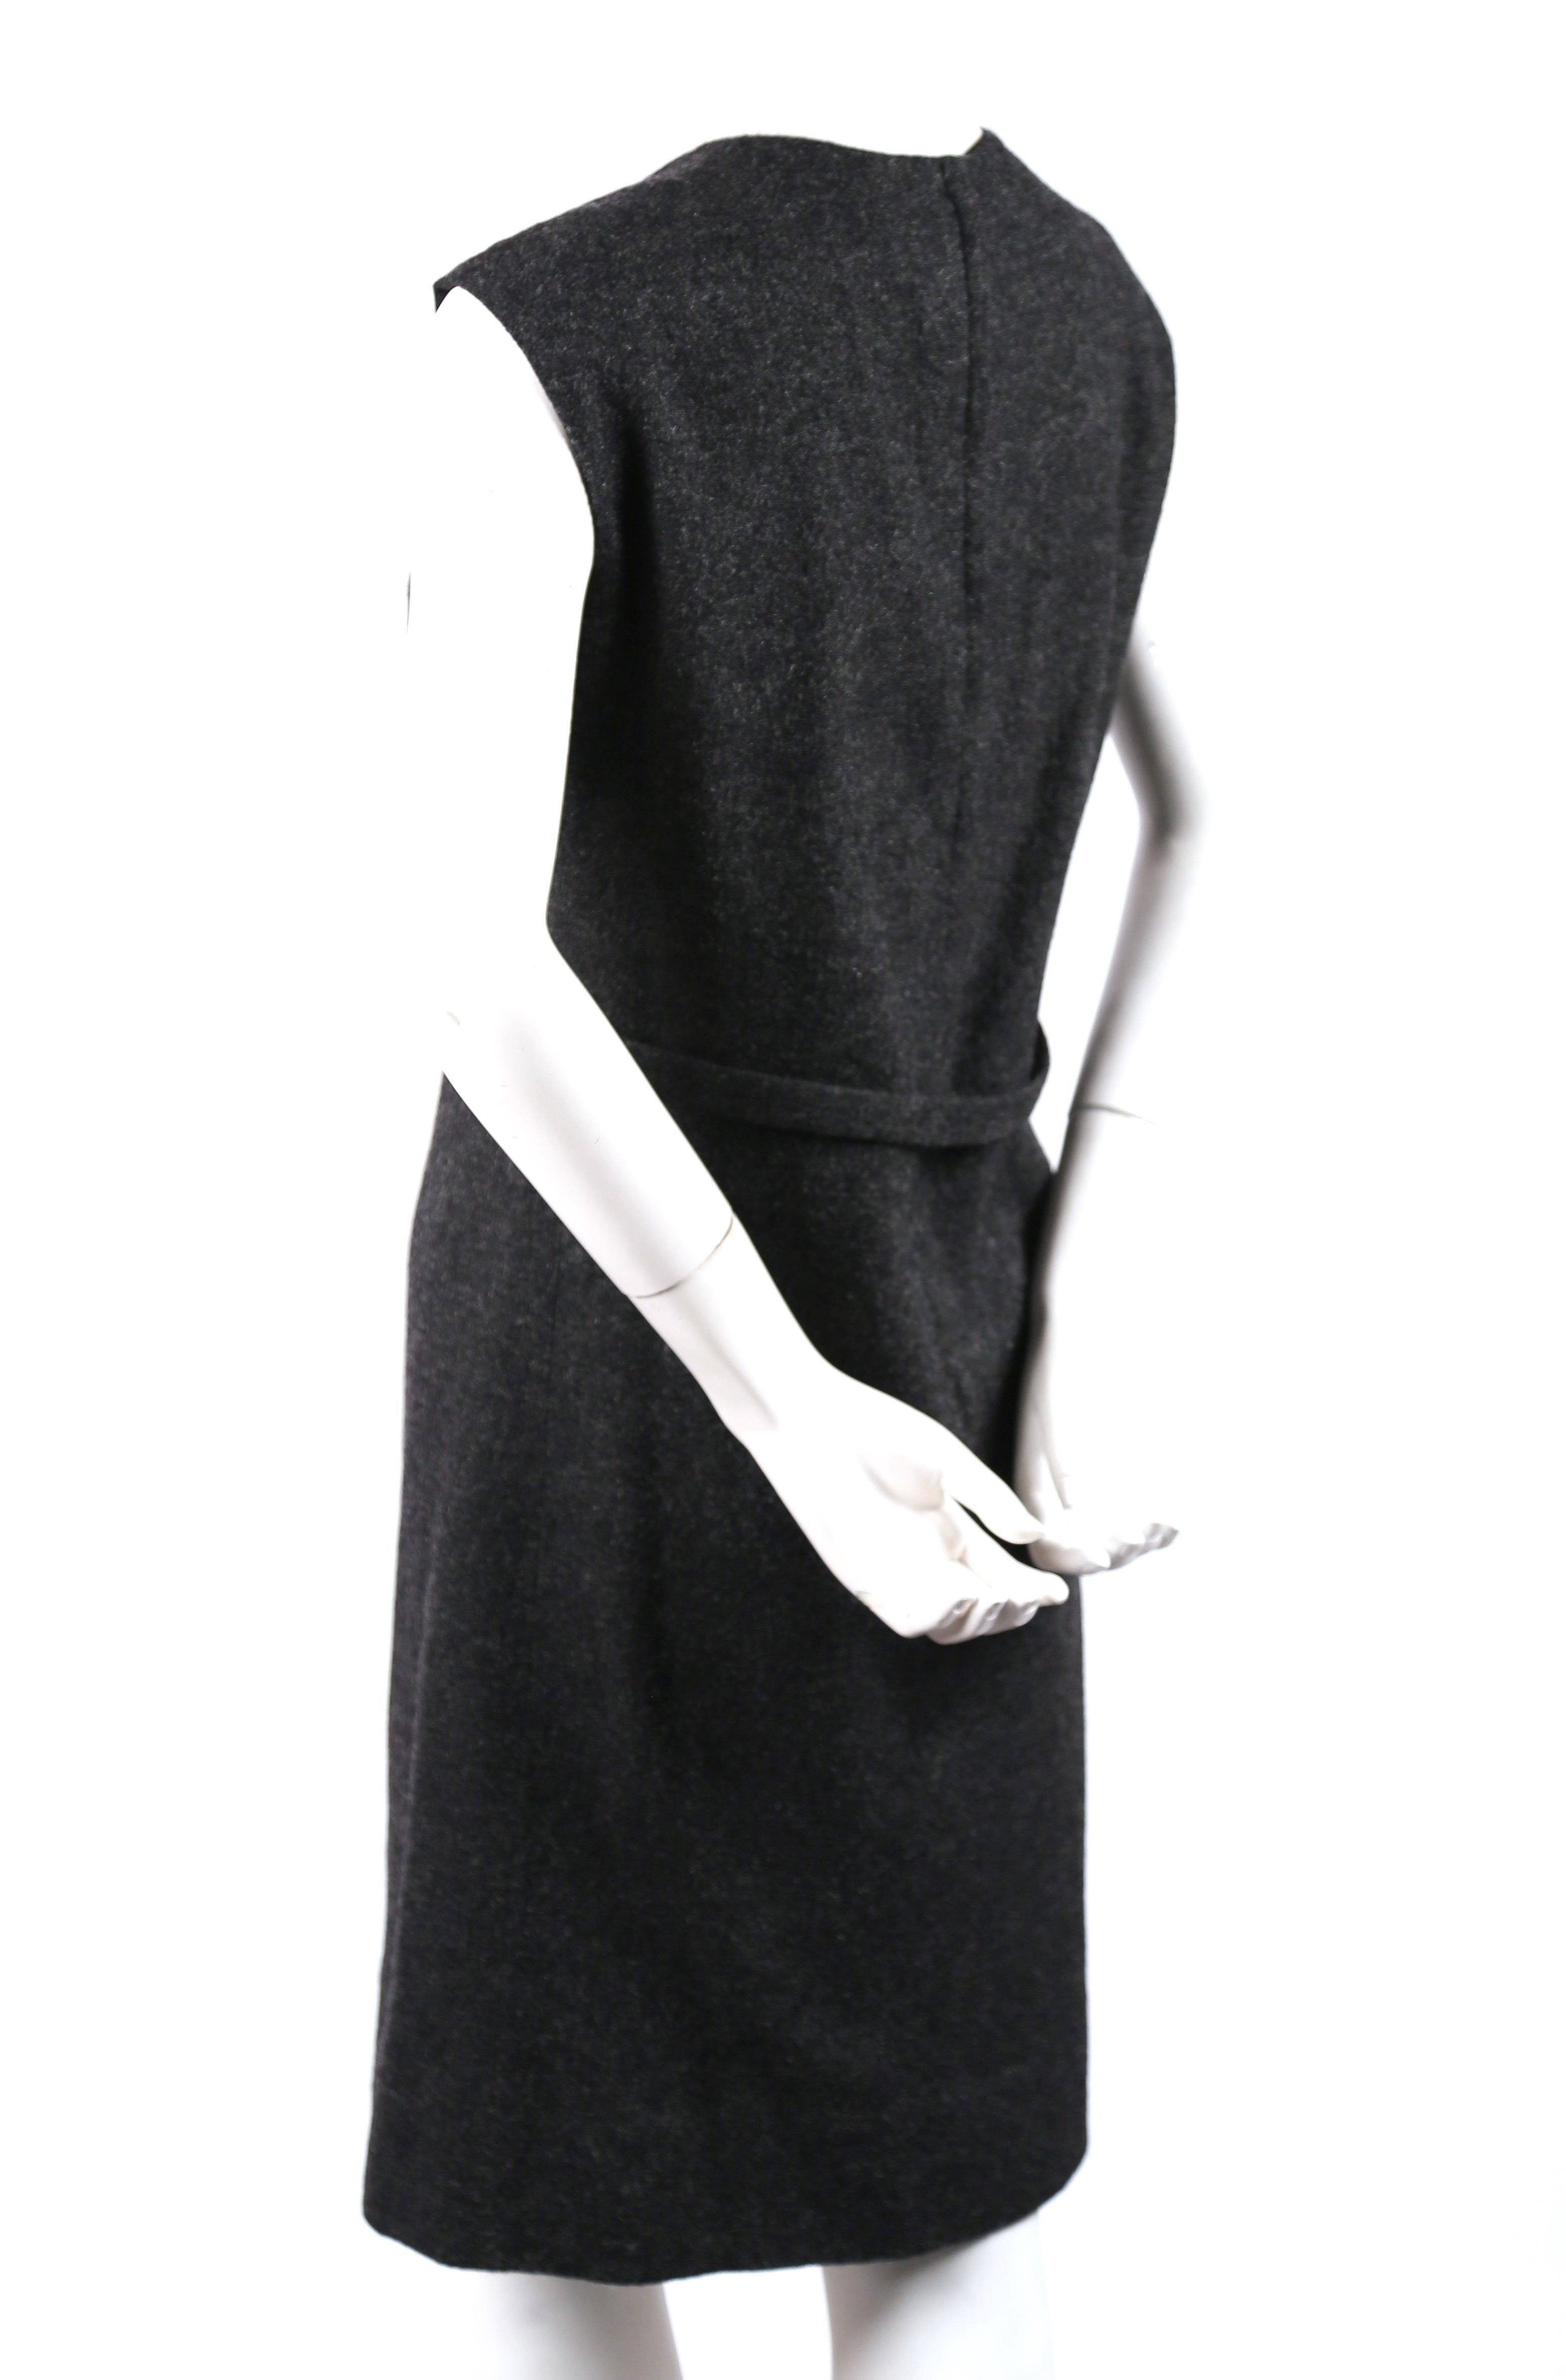 Black Sorelle Fontana charcoal grey wool dress with gold brocade detail, 1960s  For Sale